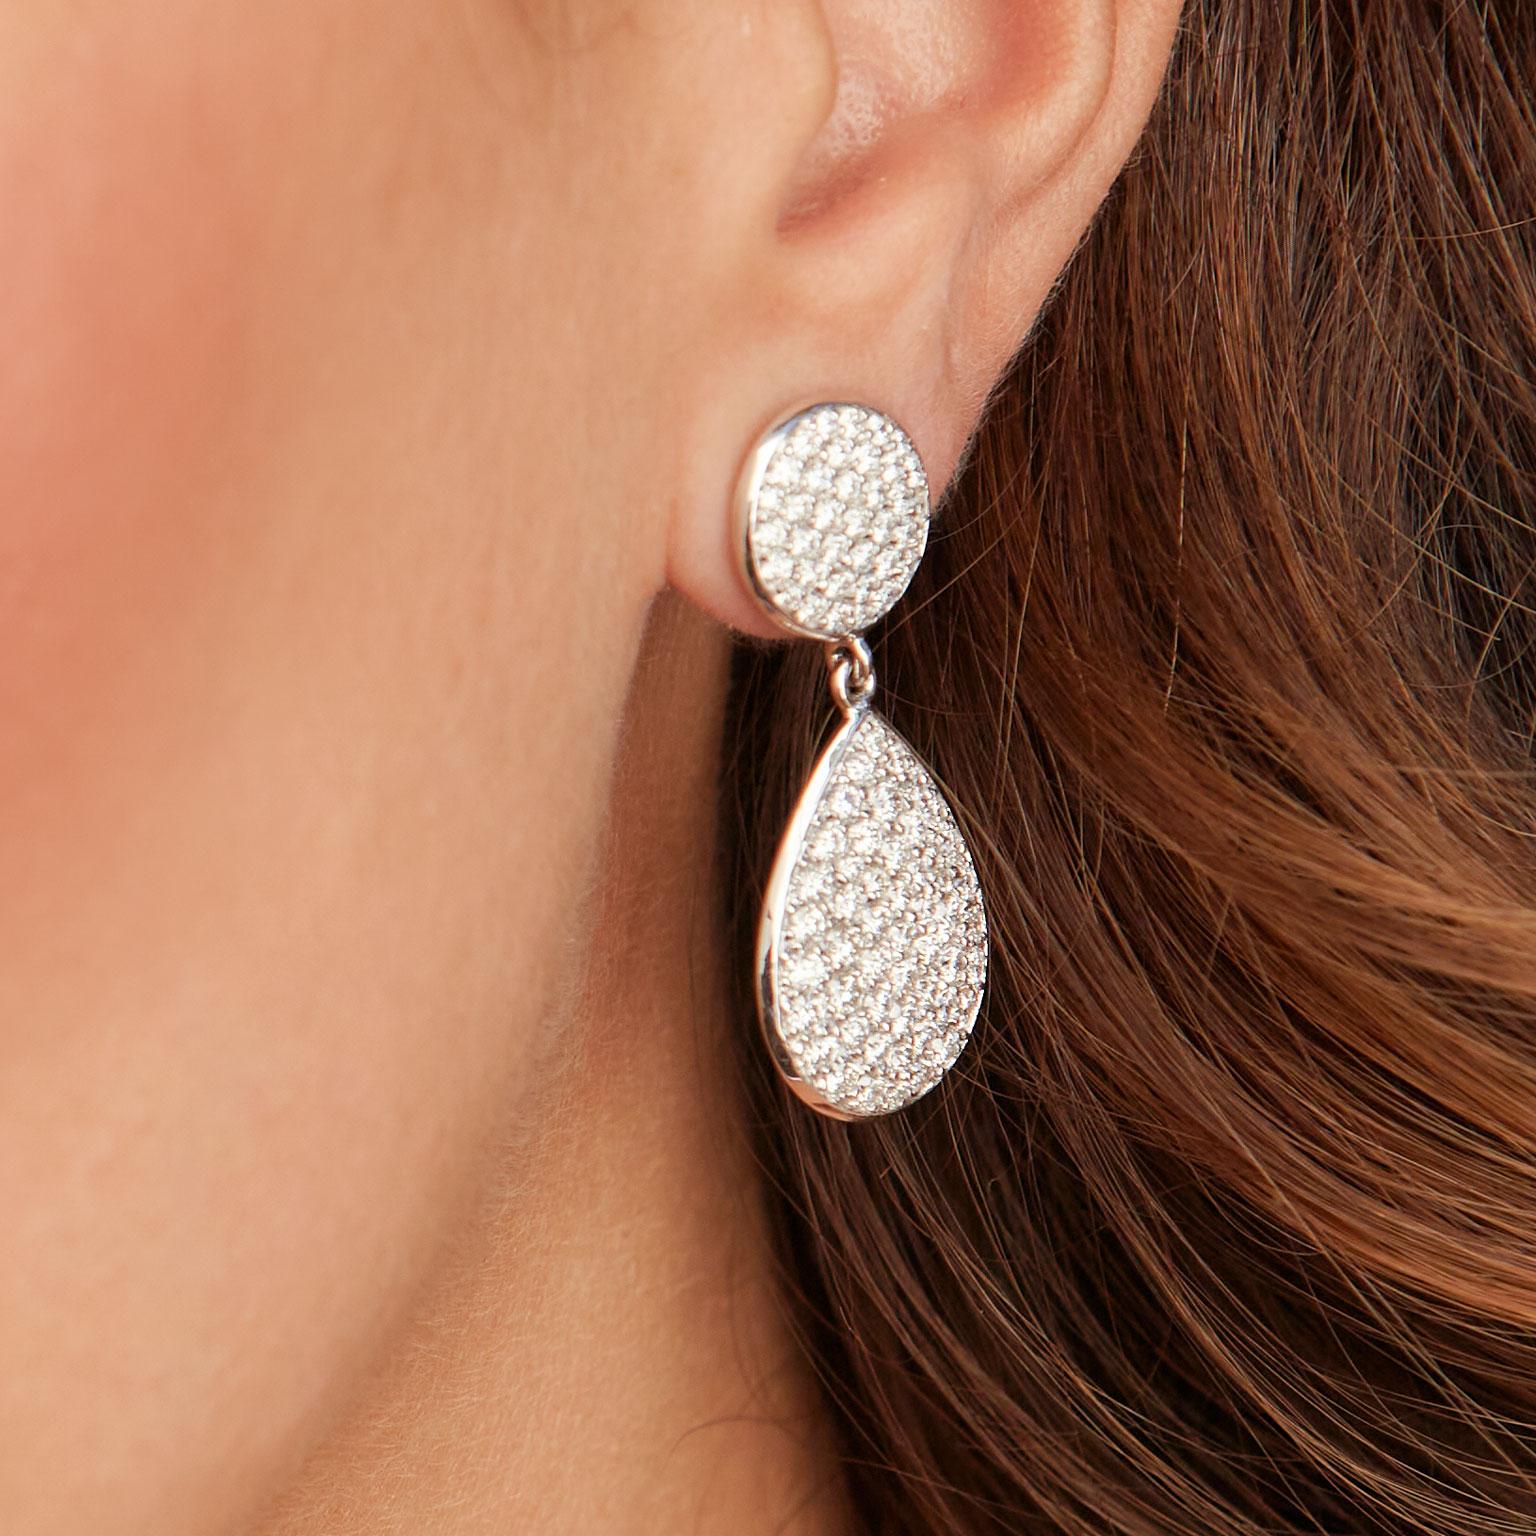 Diamond Pave Drop Earrings 4.05 Carat 18 Karat White Gold Earrings In New Condition For Sale In Miami, FL